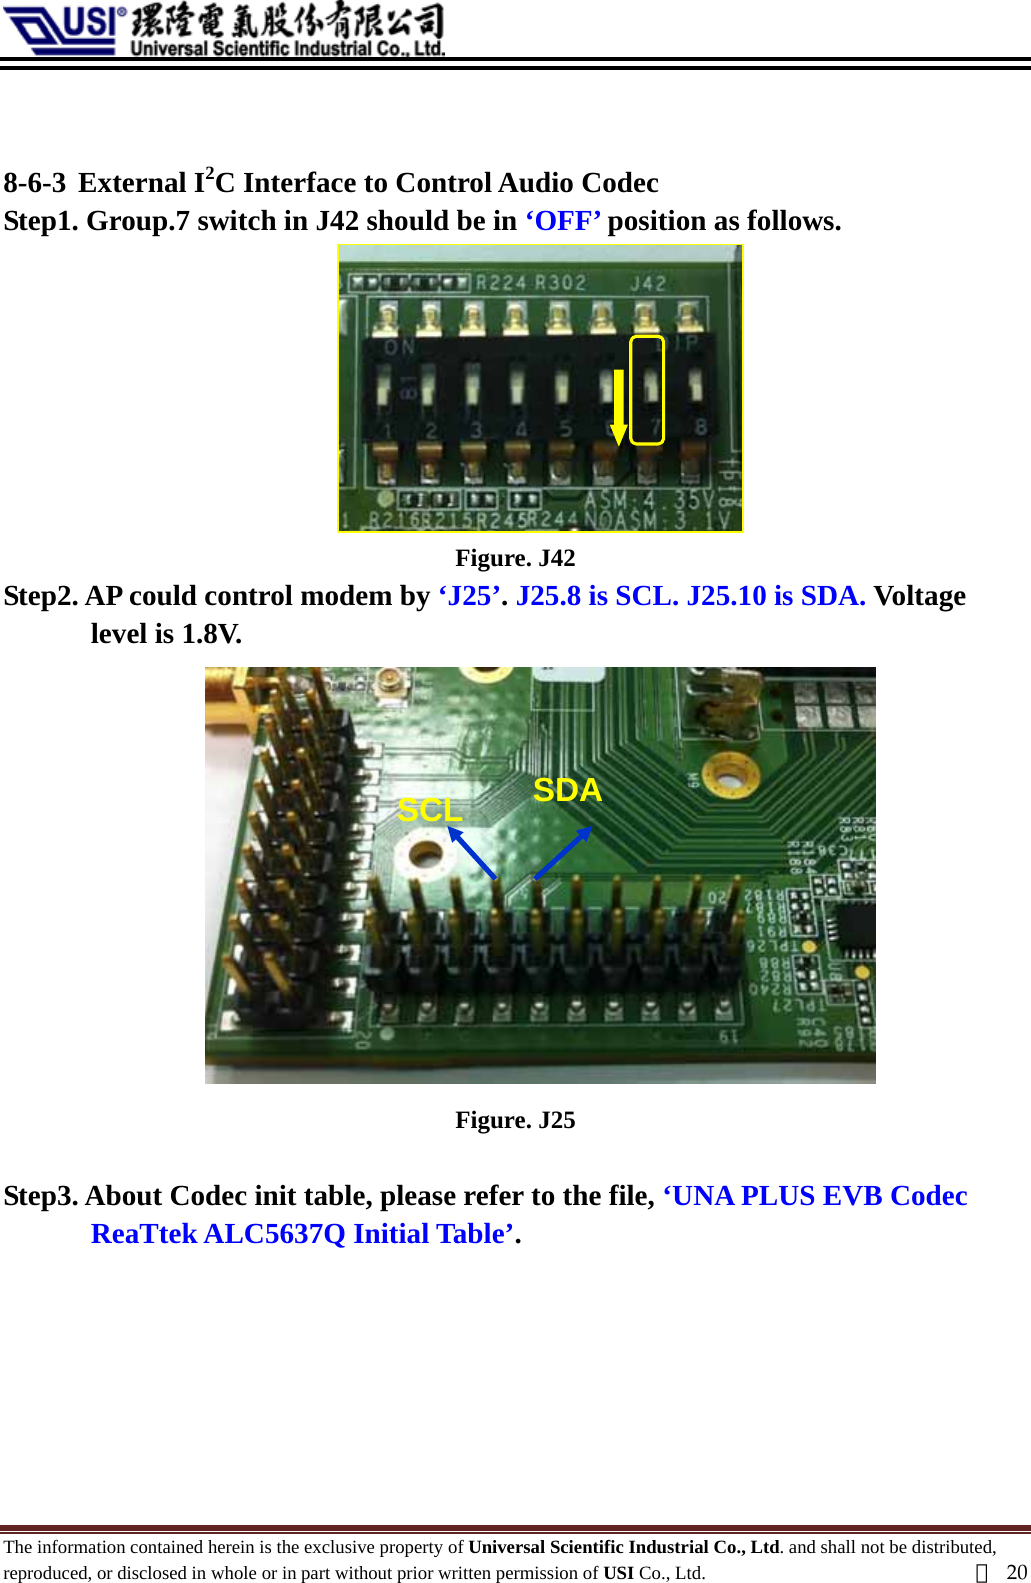    8-6-3 External I2C Interface to Control Audio Codec   Step1. Group.7 switch in J42 should be in ‘OFF’ position as follows.  Figure. J42 Step2. AP could control modem by ‘J25’. J25.8 is SCL. J25.10 is SDA. Voltage level is 1.8V. SCL  SDA  Figure. J25  Step3. About Codec init table, please refer to the file, ‘UNA PLUS EVB Codec ReaTtek ALC5637Q Initial Table’.       The information contained herein is the exclusive property of Universal Scientific Industrial Co., Ltd. and shall not be distributed, reproduced, or disclosed in whole or in part without prior written permission of USI Co., Ltd.  頁20 